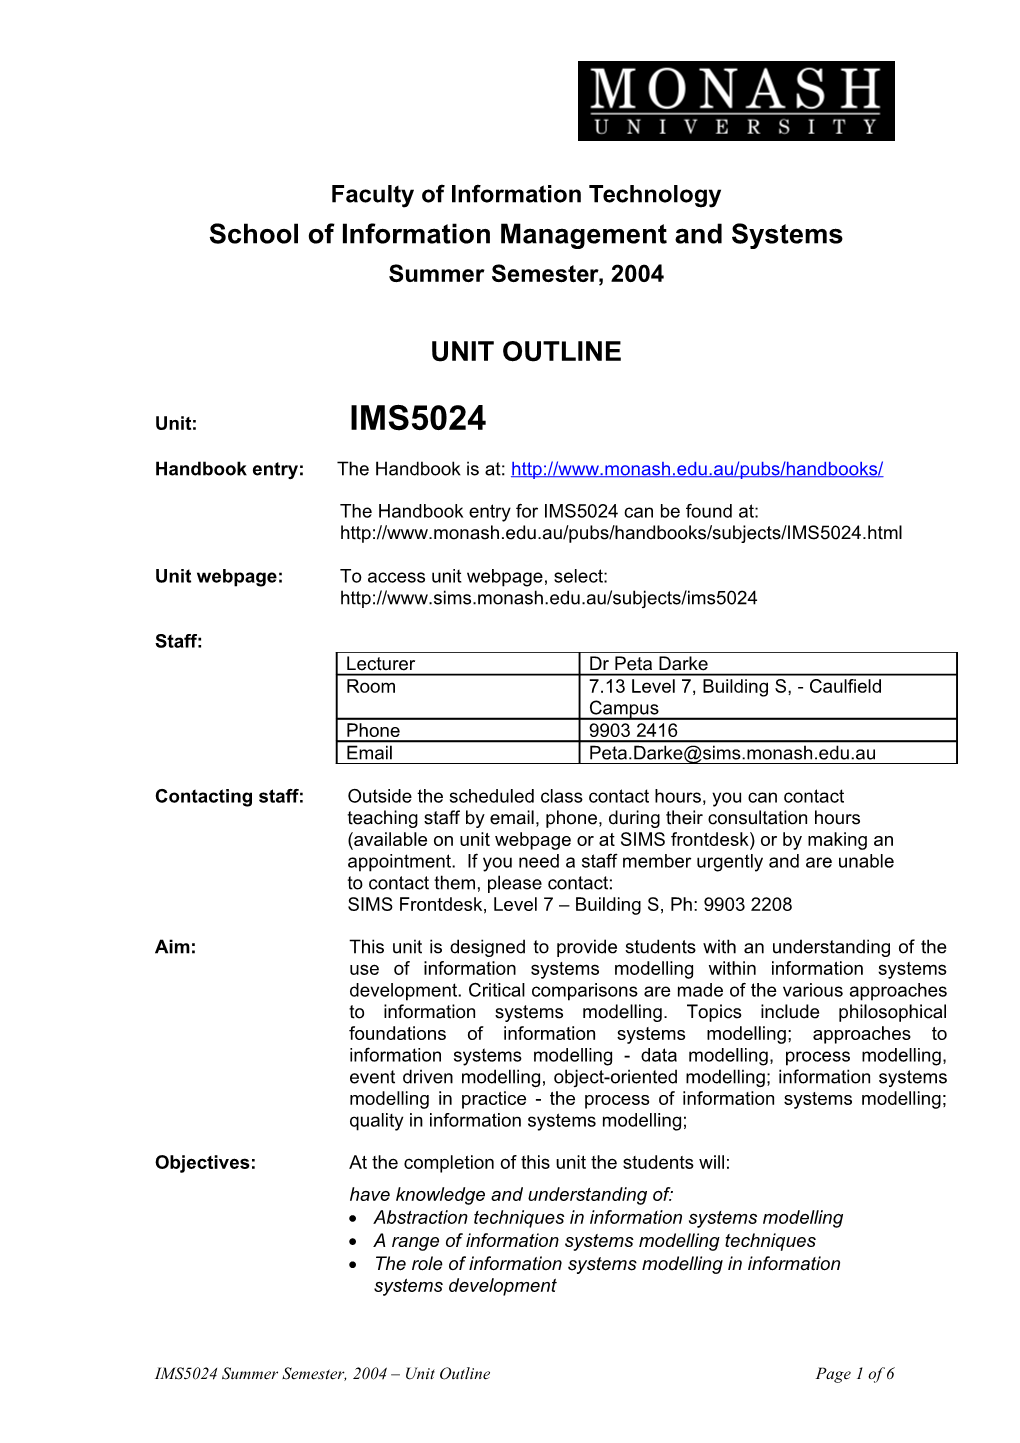 School of Information Management and Systems